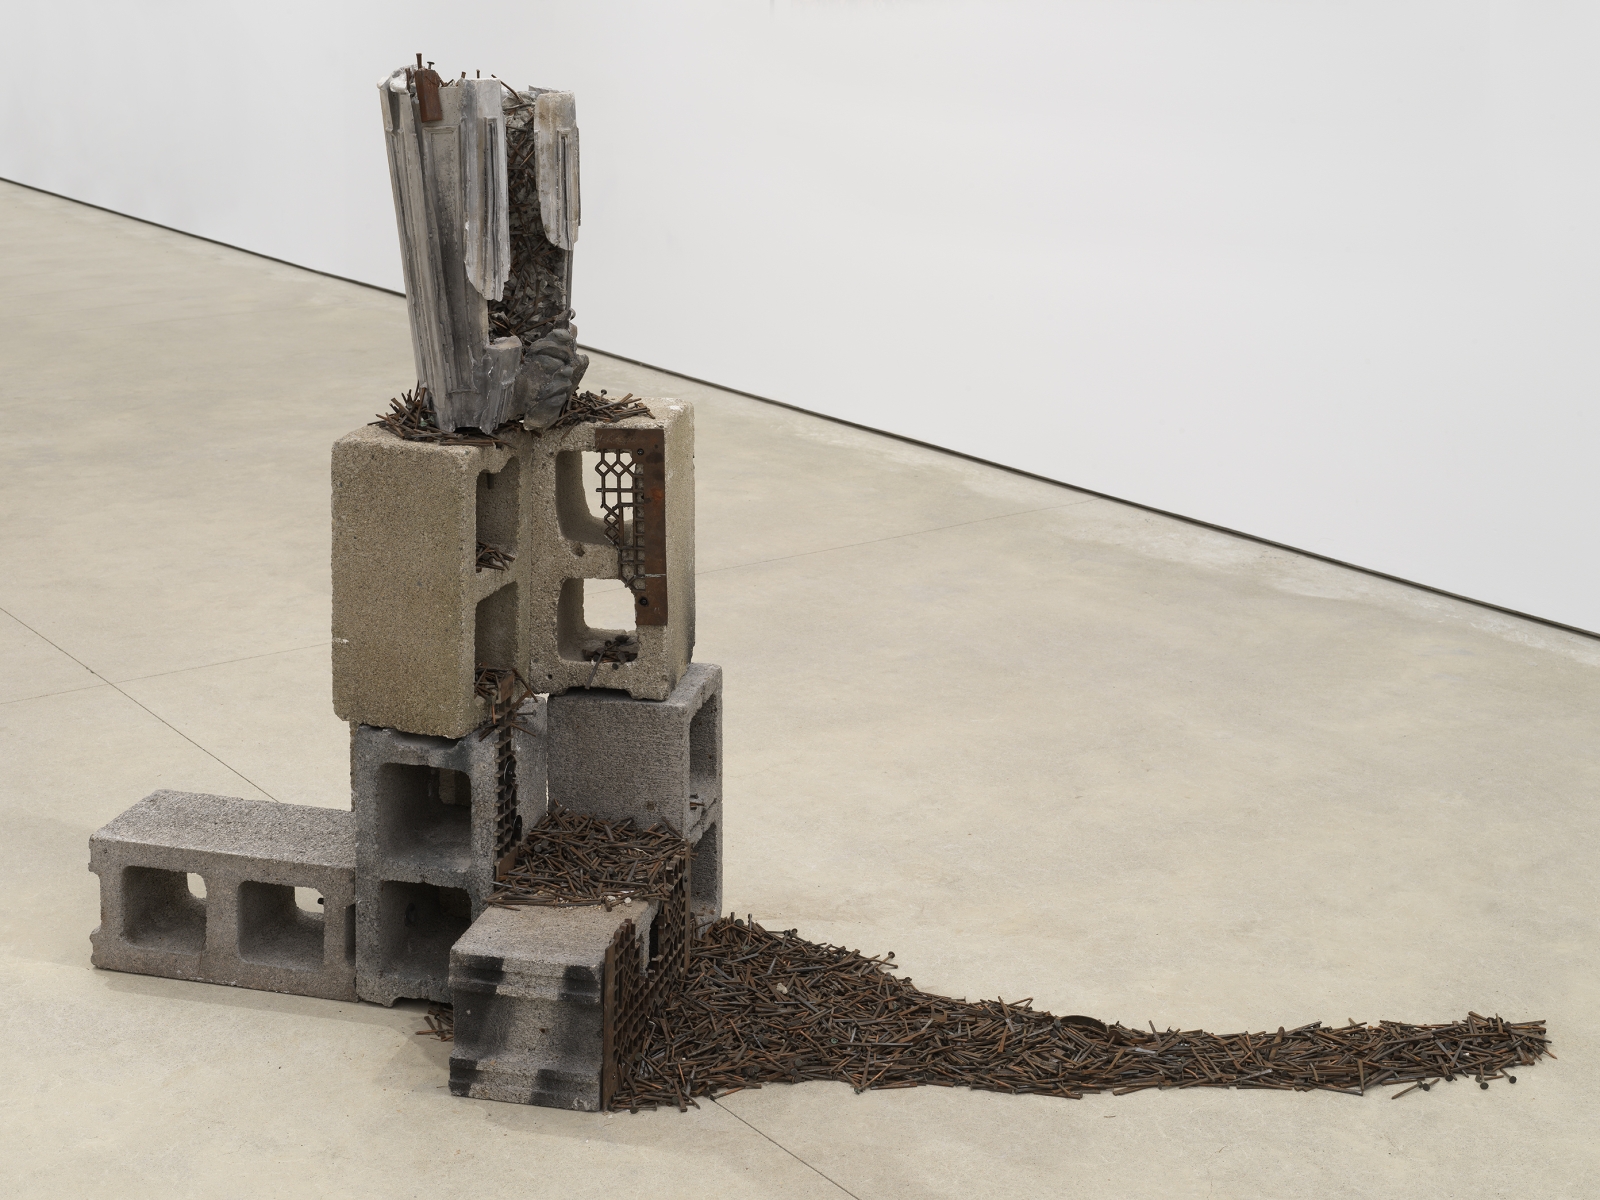 Chiffon Thomas
Grounded II, 2021
cinder blocks, concrete, plaster, rusted and oxidized nails, steel
53 x 31 x 26 ins.
134.6 x 78.7 x 66 cm